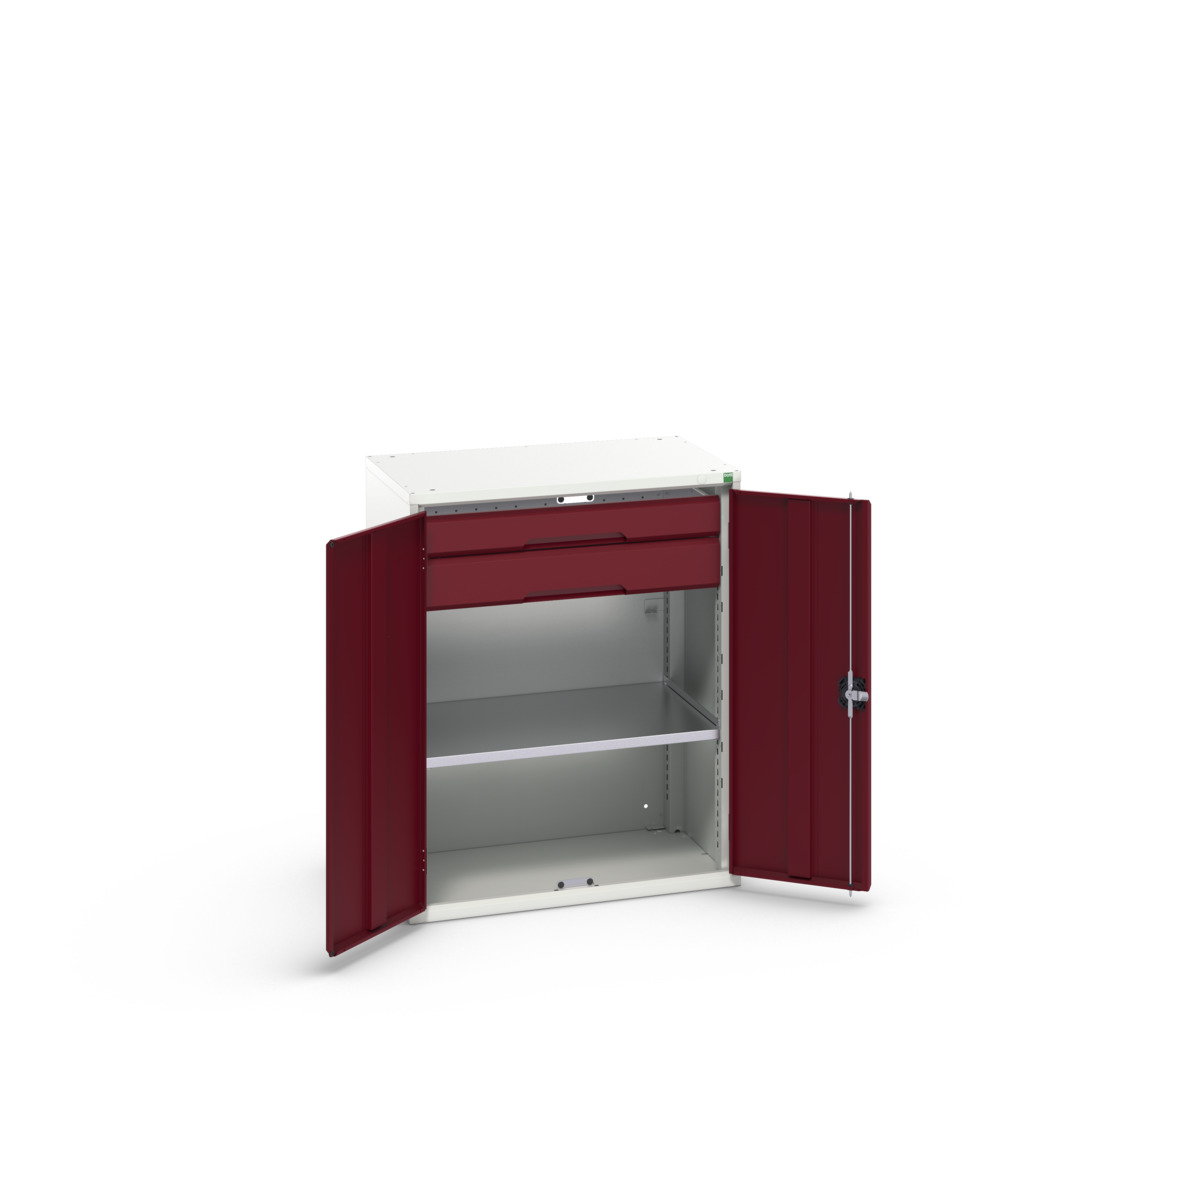 16926453.24 - verso kitted cupboard